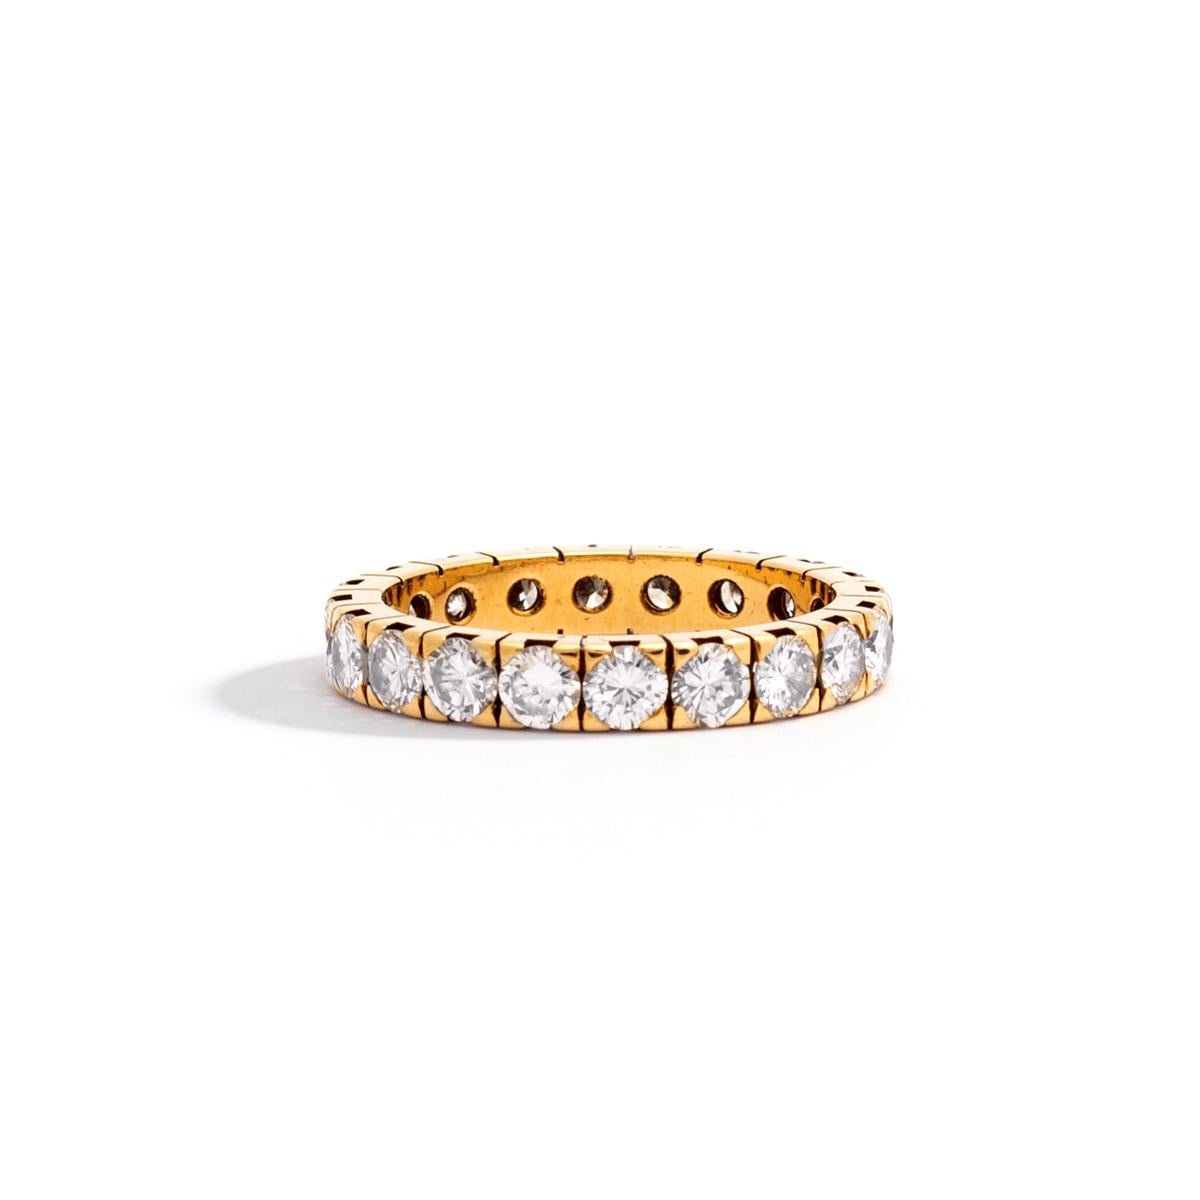 Diamond on yellow gold Band Wedding Ring.
20 diamonds round cut.
Modern cut. Estimated to be H color and Vvs clarity.
Ring thickness: 3.00 millimeters.
Ring size: 6